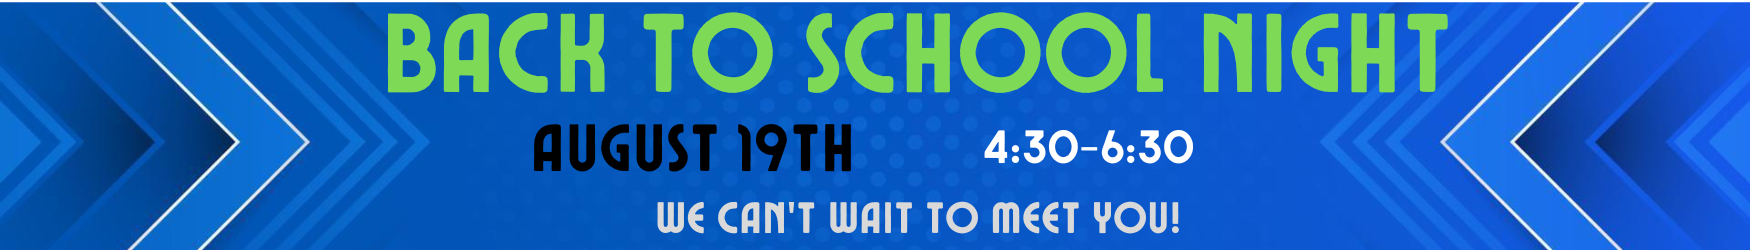 Back to School Night August 19th 4:20-6:30 We can't wait to meet you!